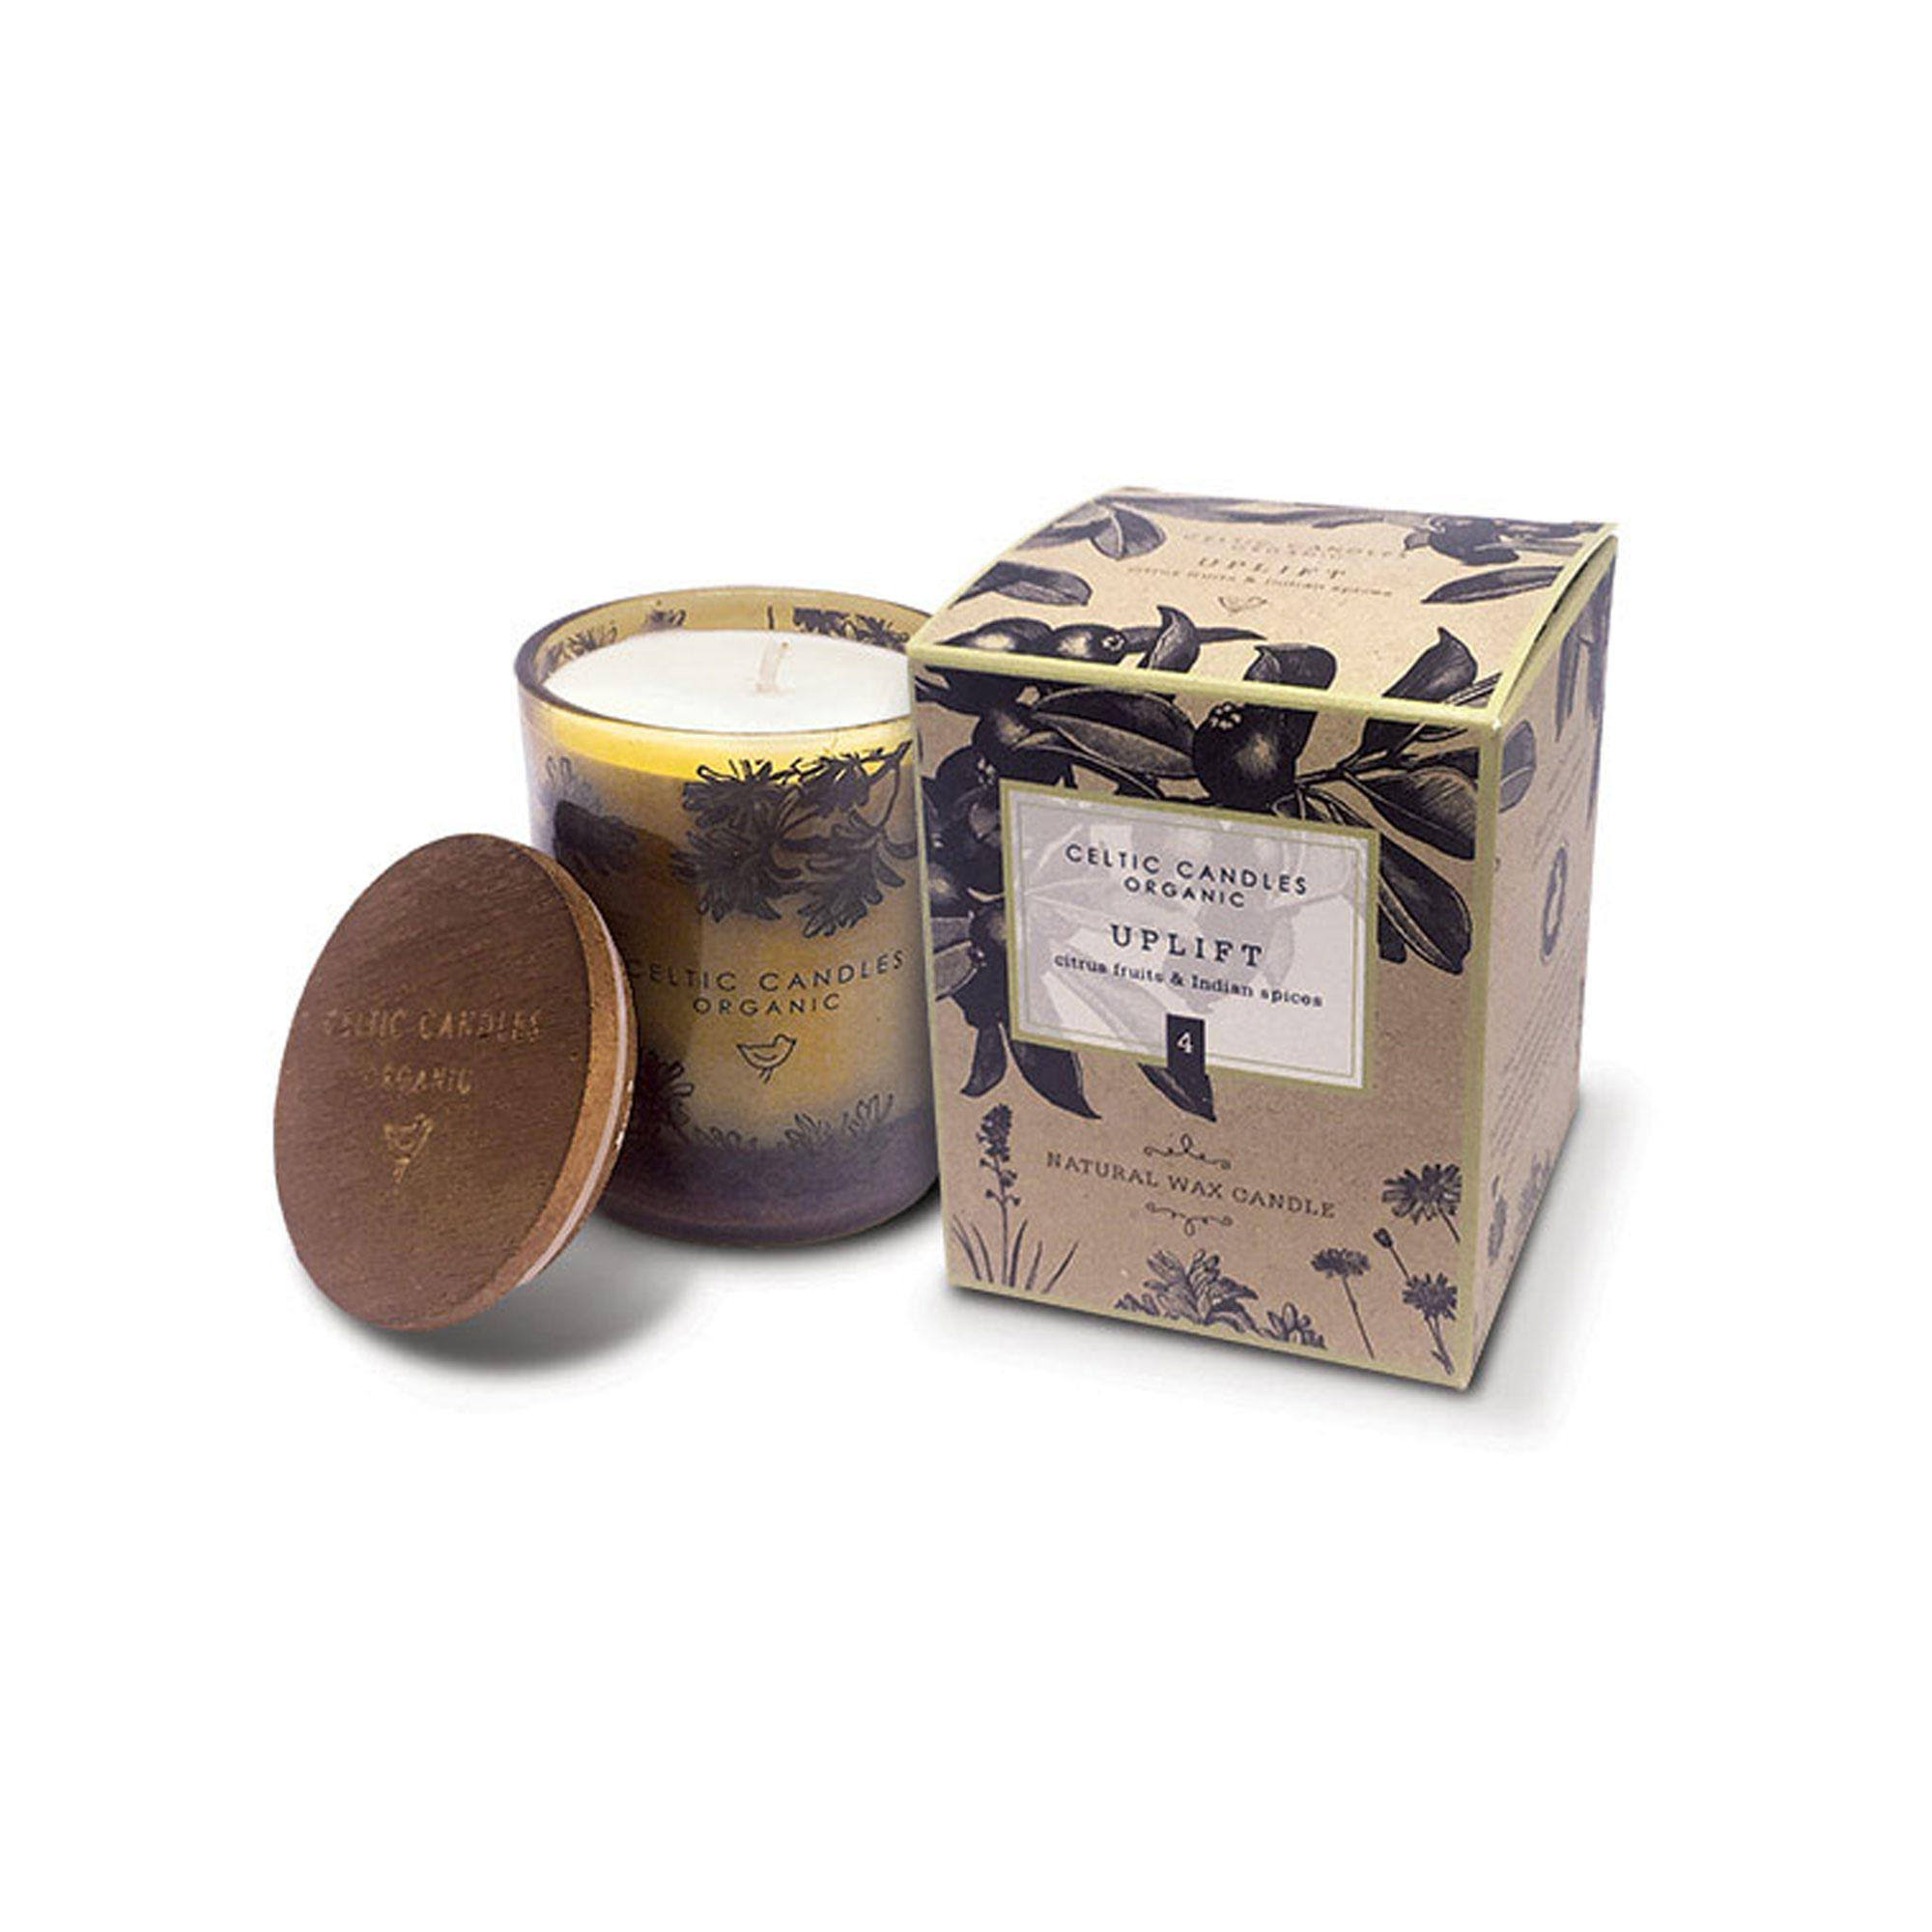 Celtic Candles Celtic Candles Uplift Citrus Fruits and Indian Spice Candle